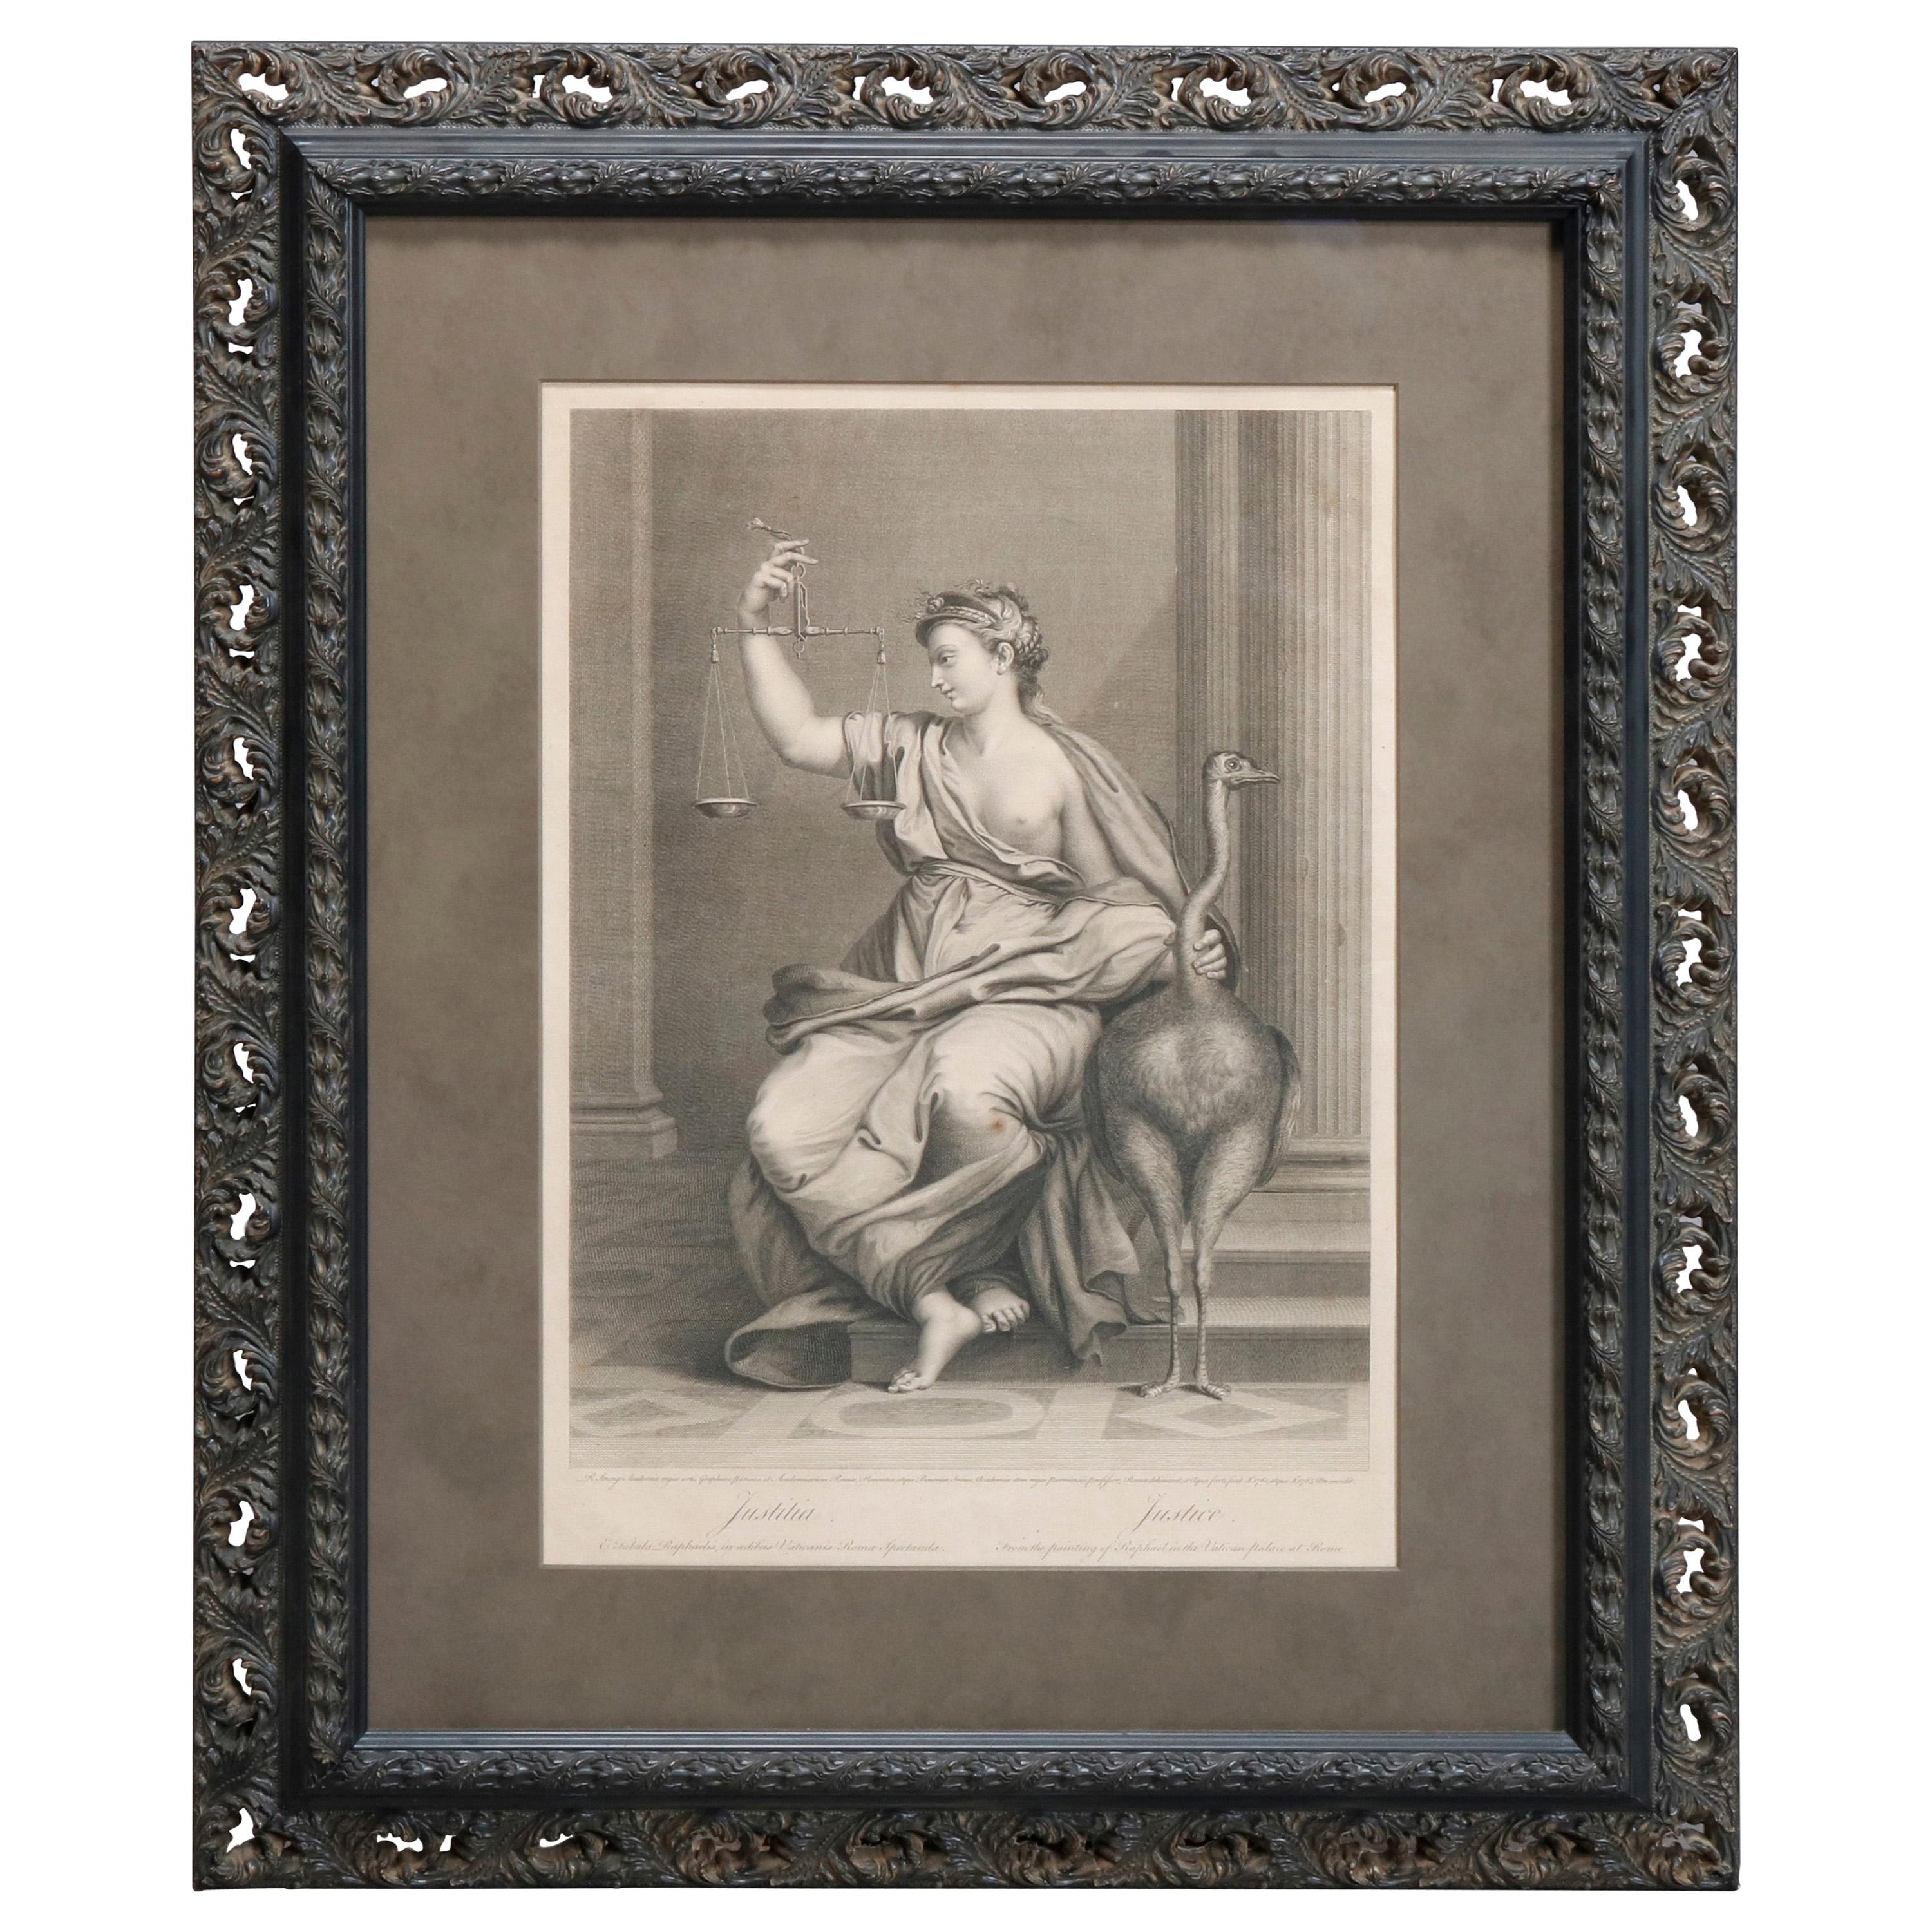 Antique Neoclassical Lithograph of "Justicia", Lady Justice and Ostrich